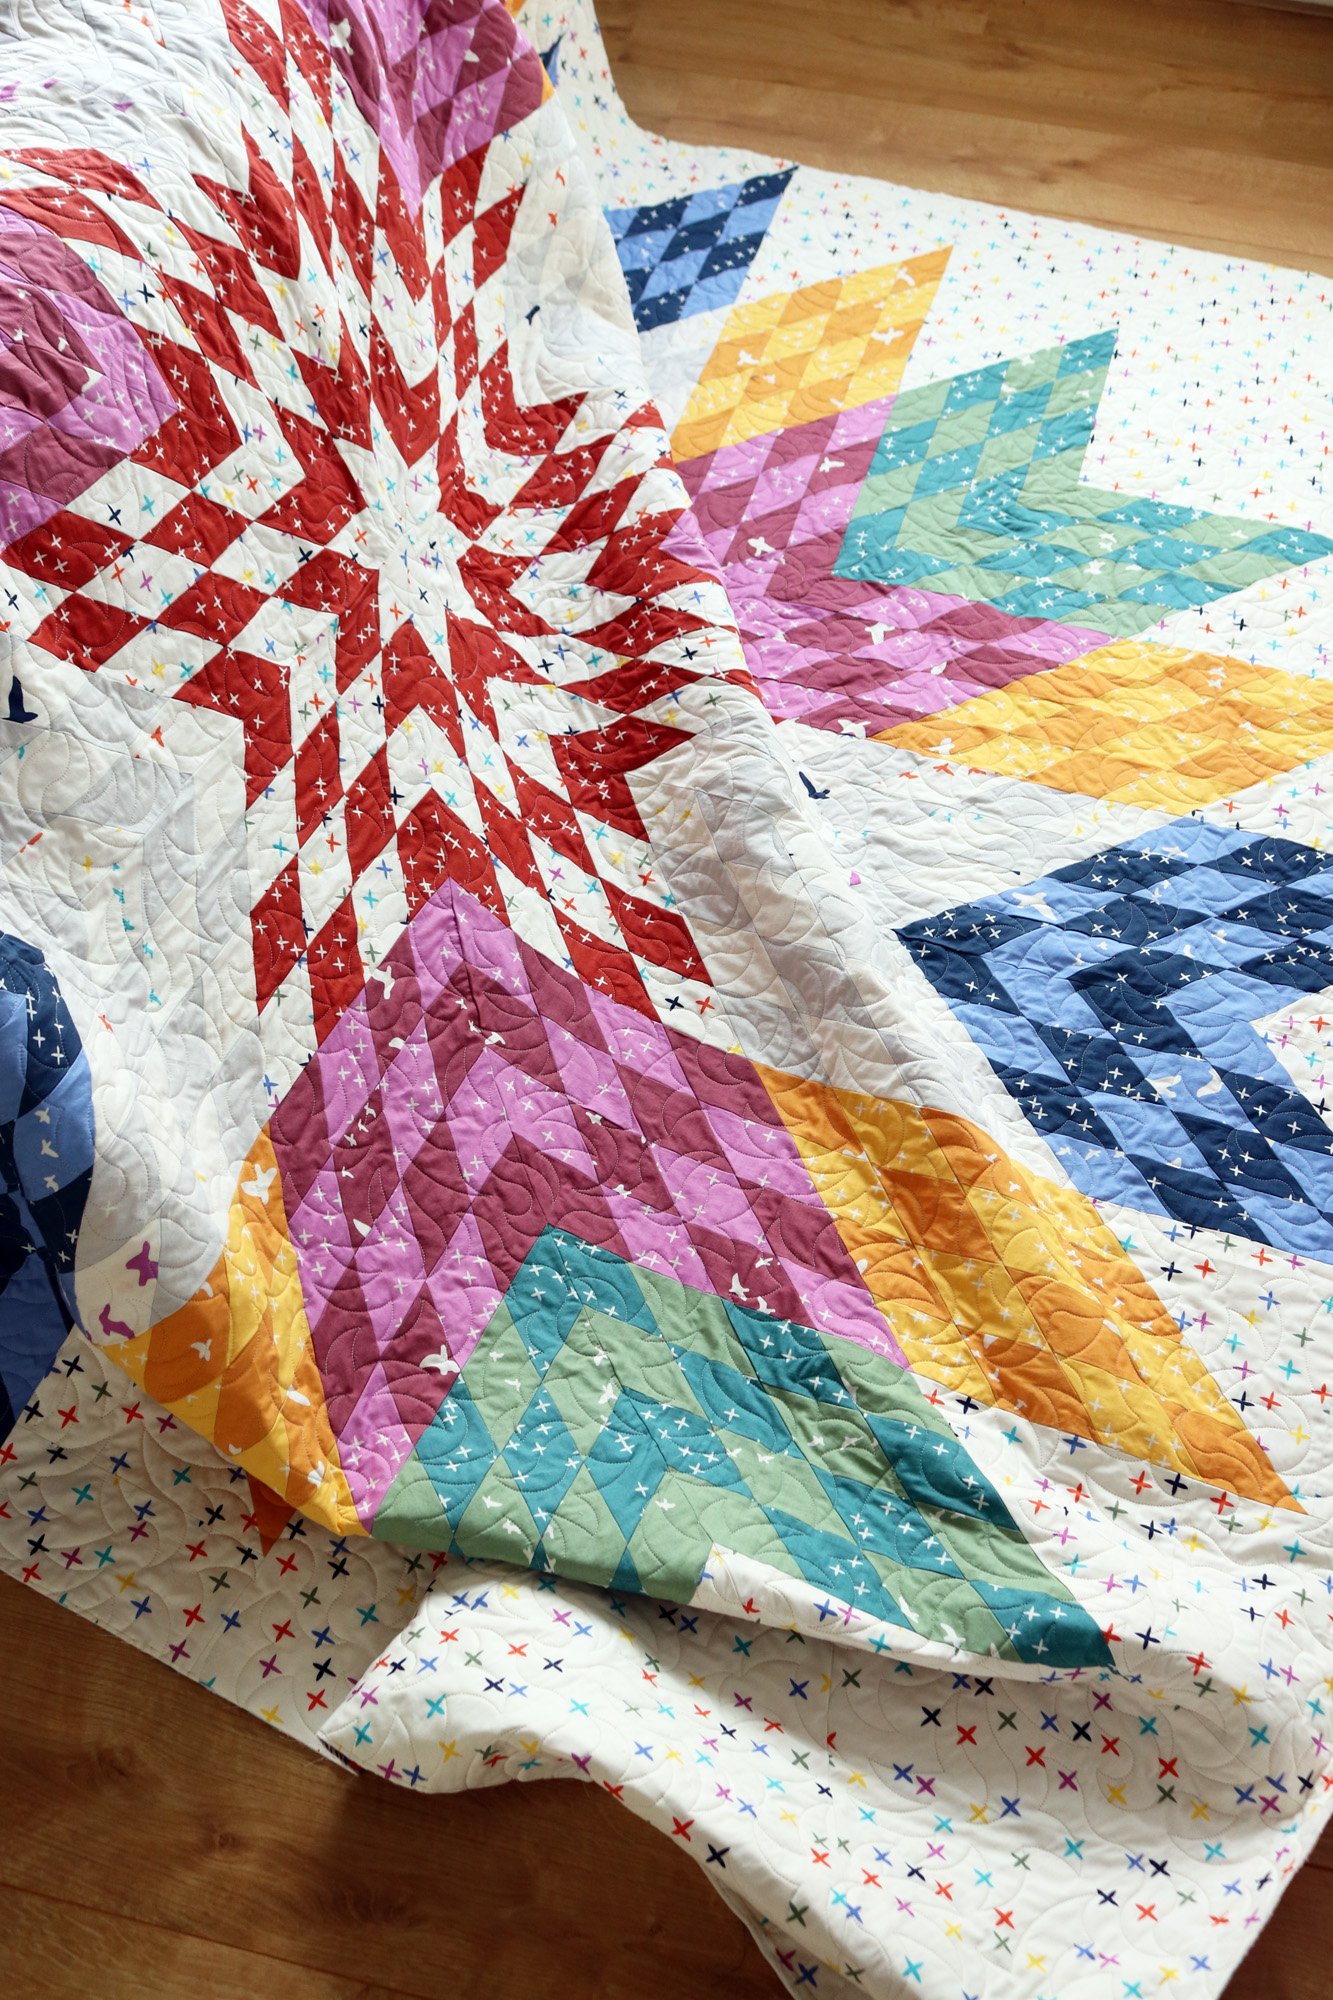 in the Quilting Studio, no. 40 — Stitched in Color